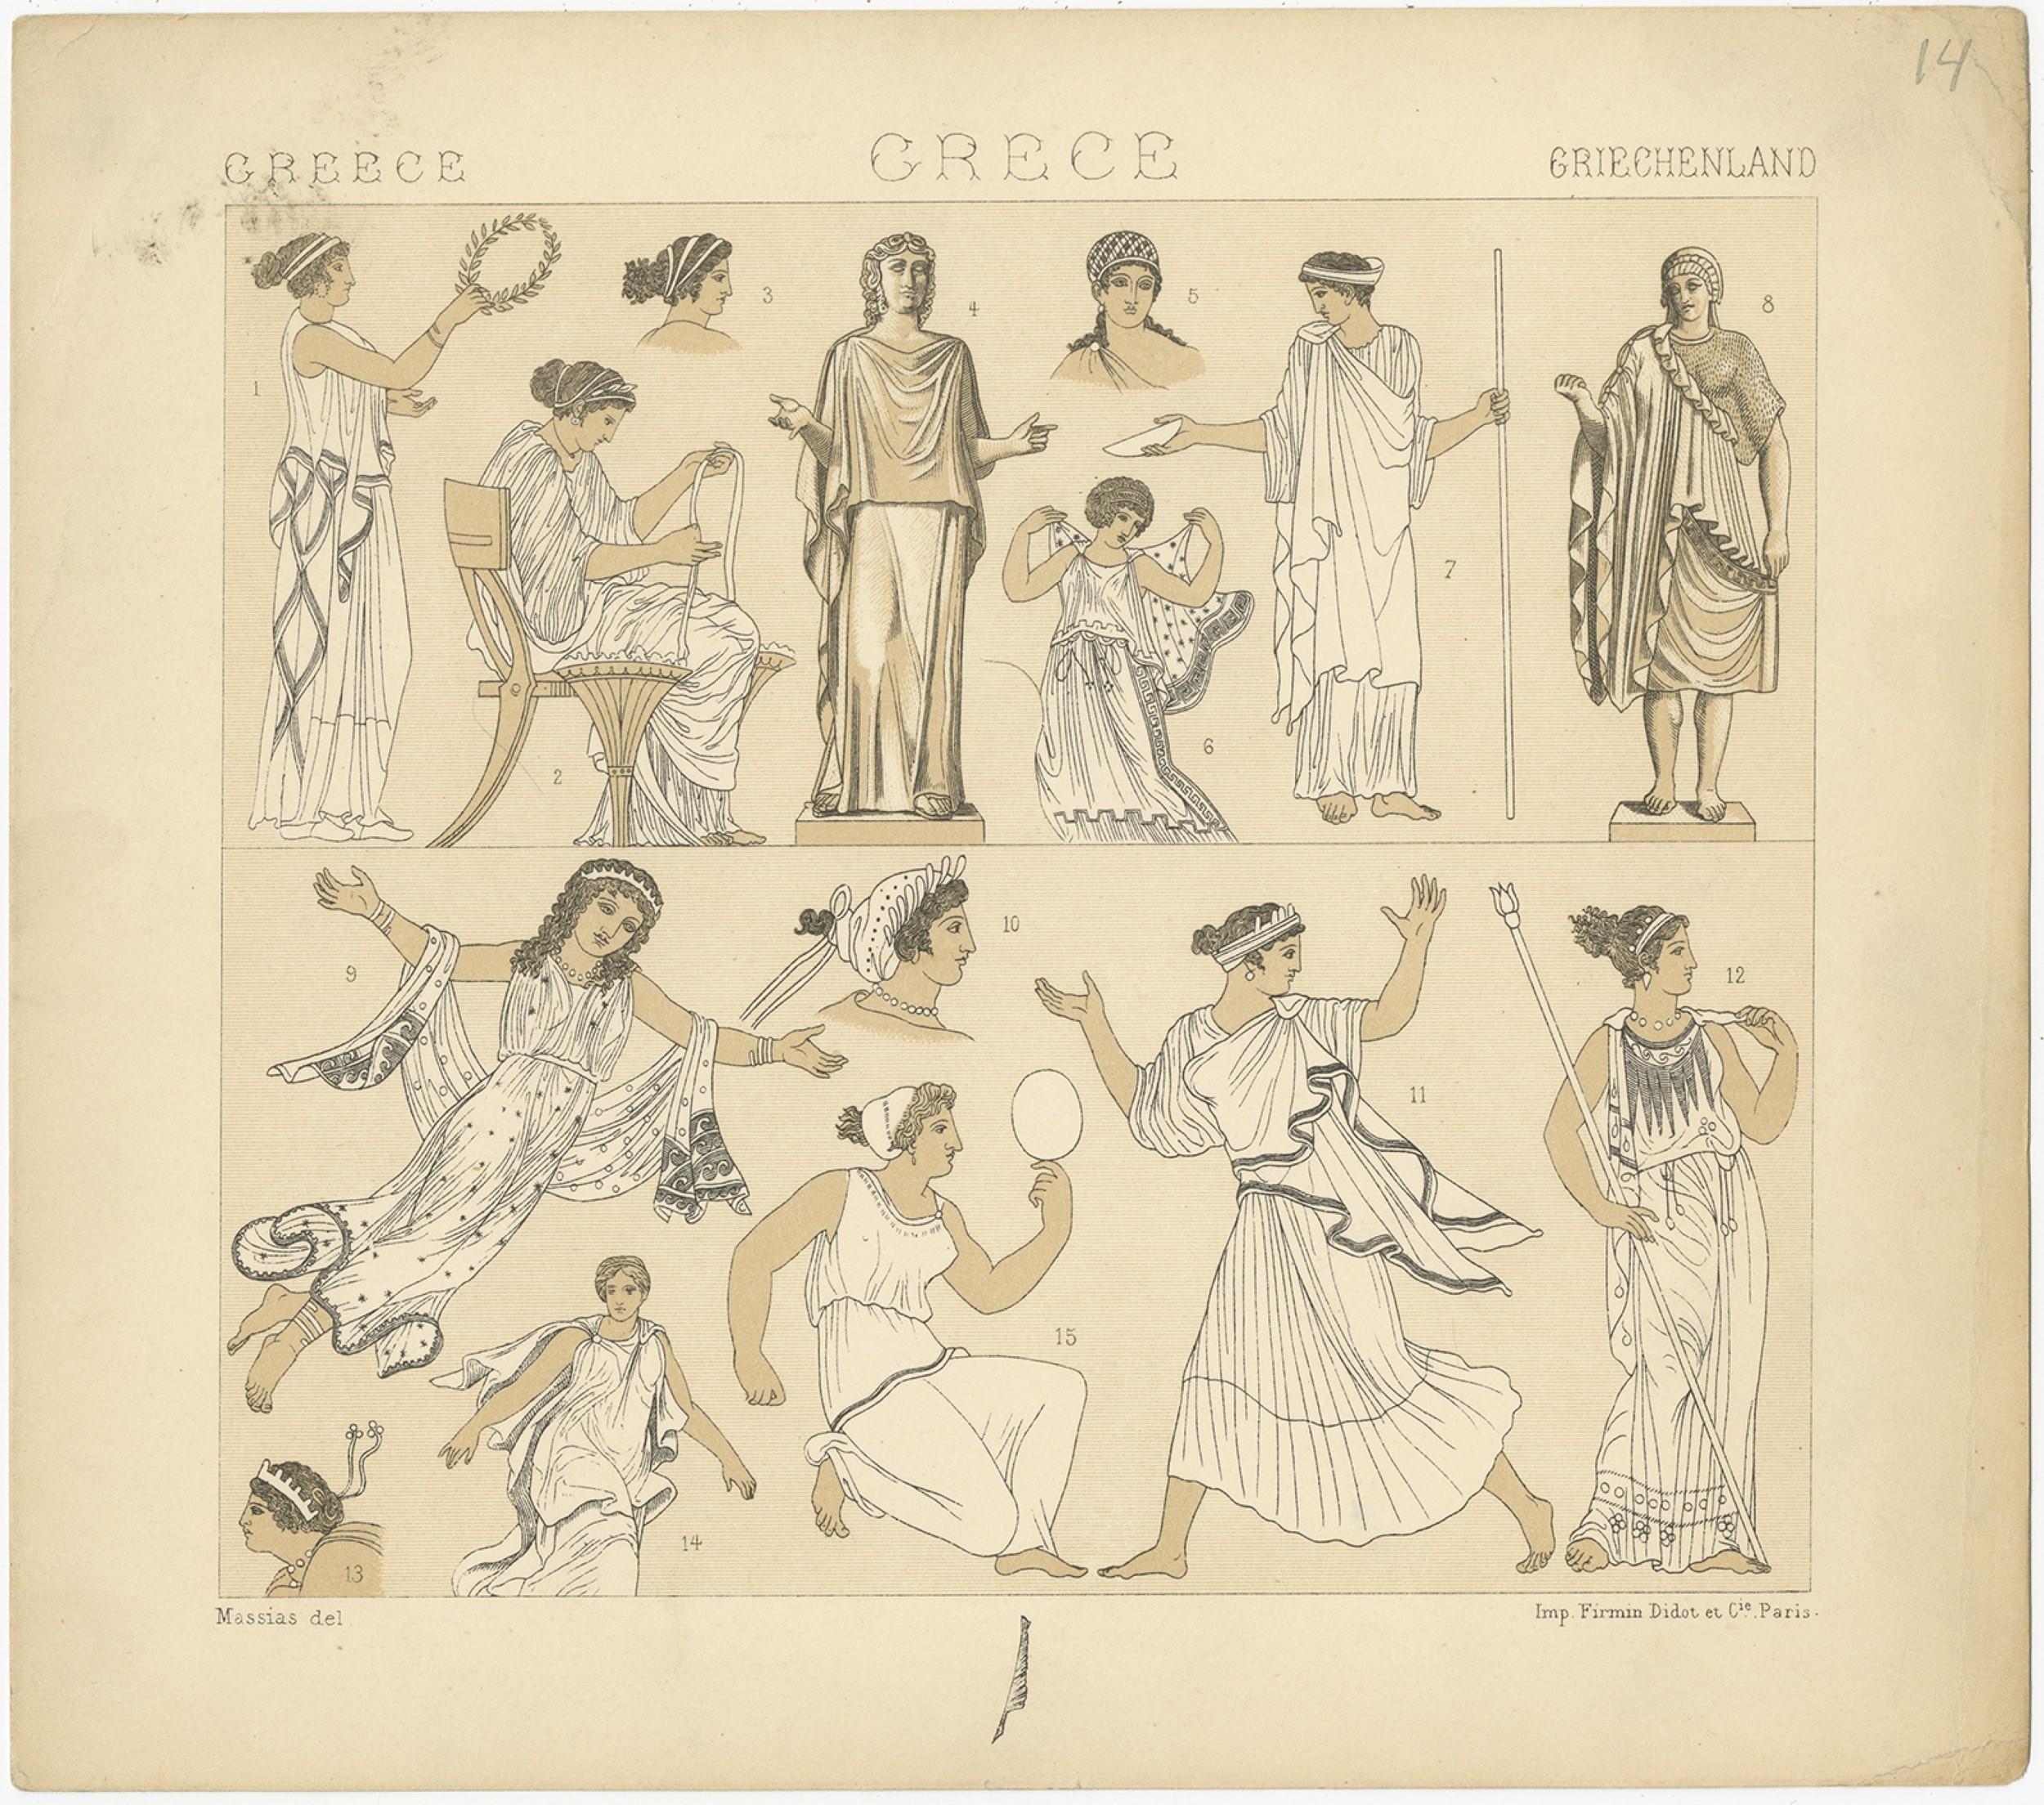 Antique print titled 'Greece - Grece - Griechenland'. Chromolithograph of Greece costumes. This print originates from 'Le Costume Historique' by M.A. Racinet. Published, circa 1880.